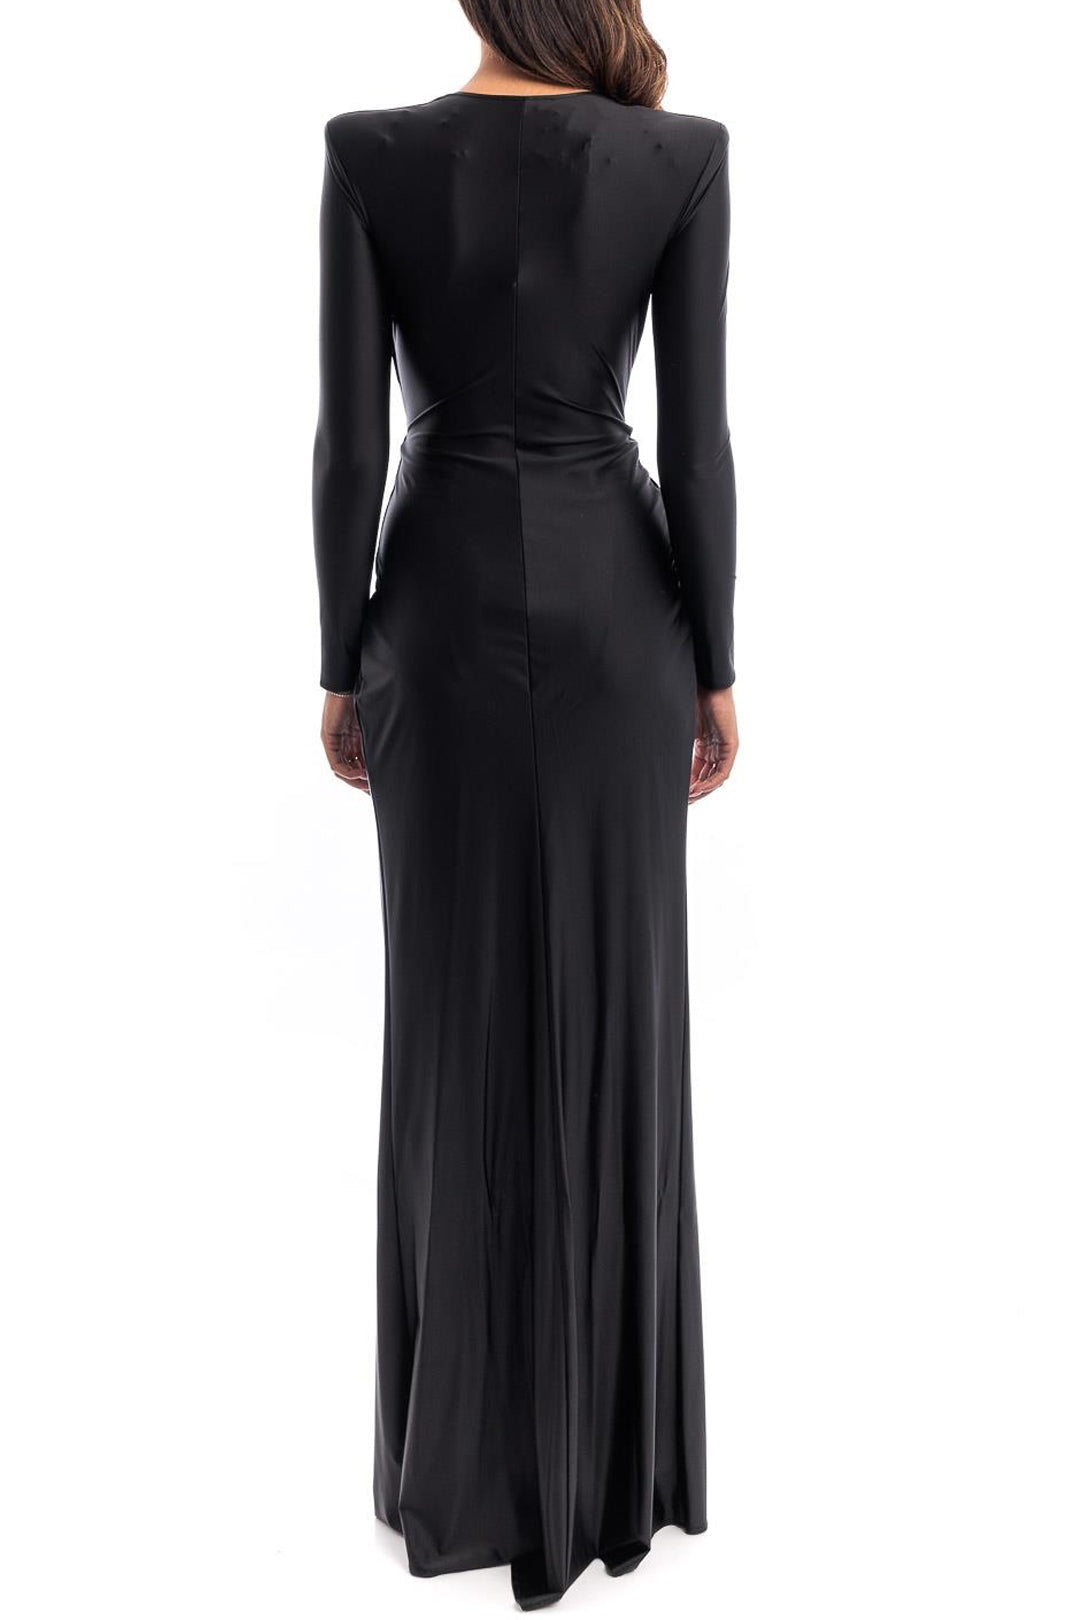 V-neck Pearl Cross Twist Front Ruched Long Sleeve Maxi Dress